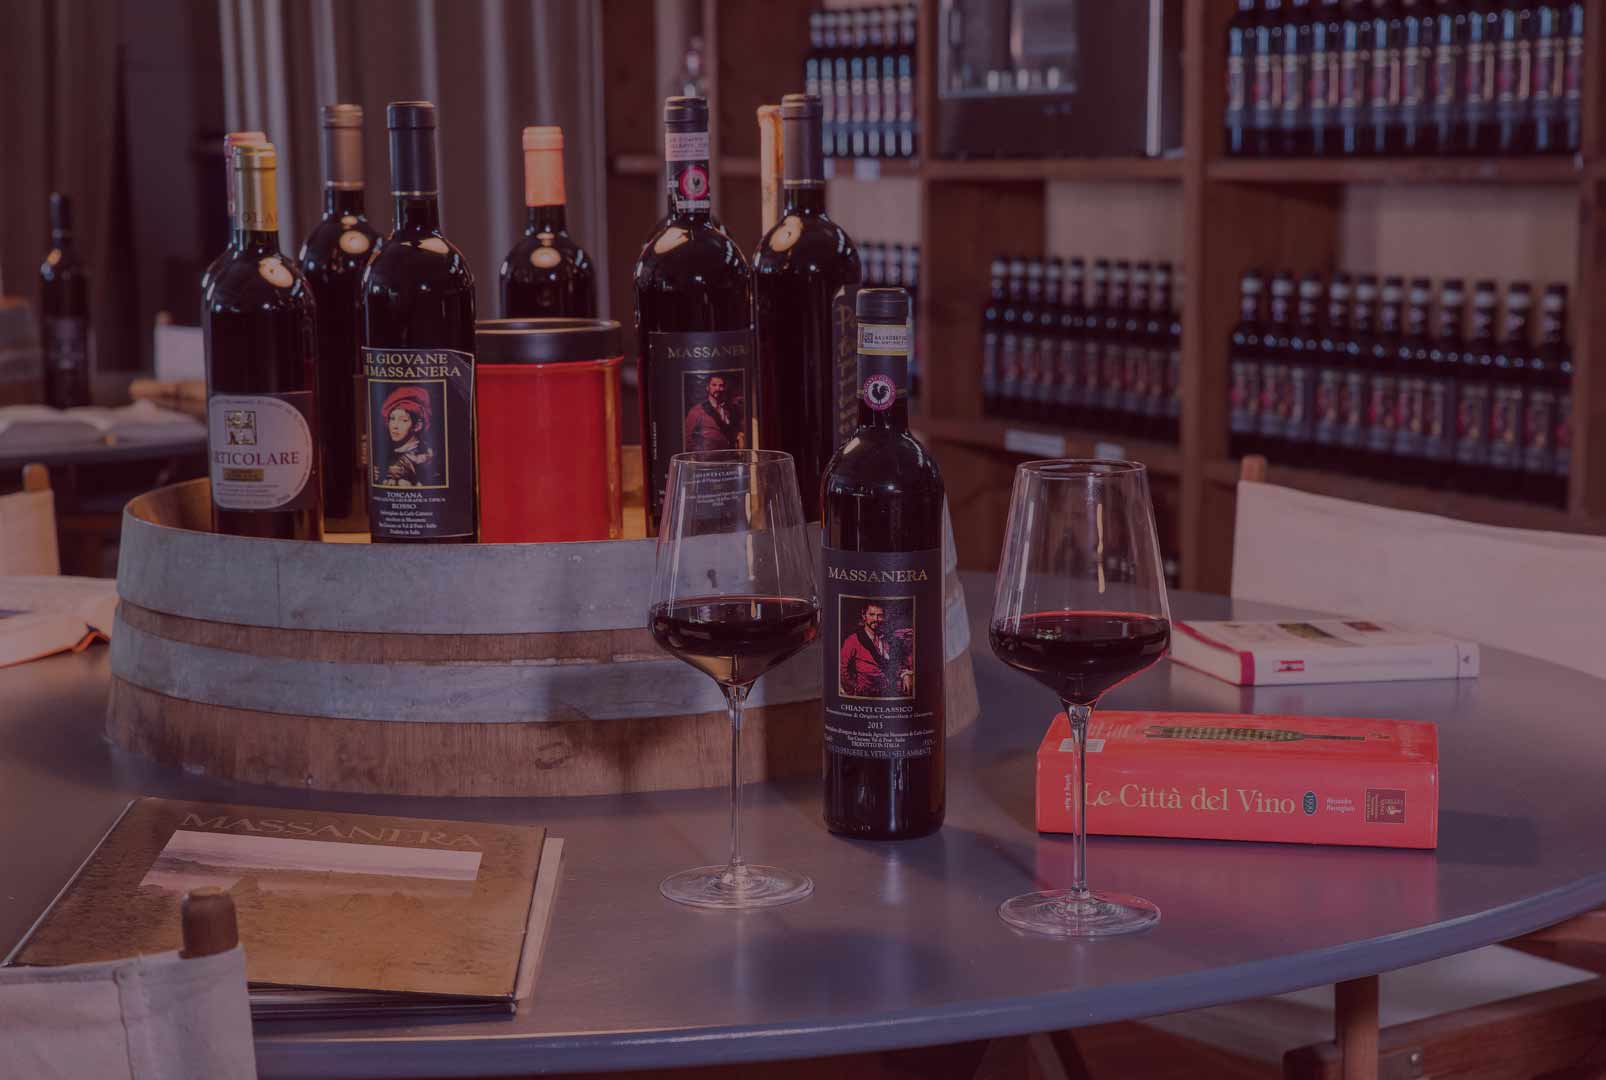 Tuscan Wine is famous…discover it!